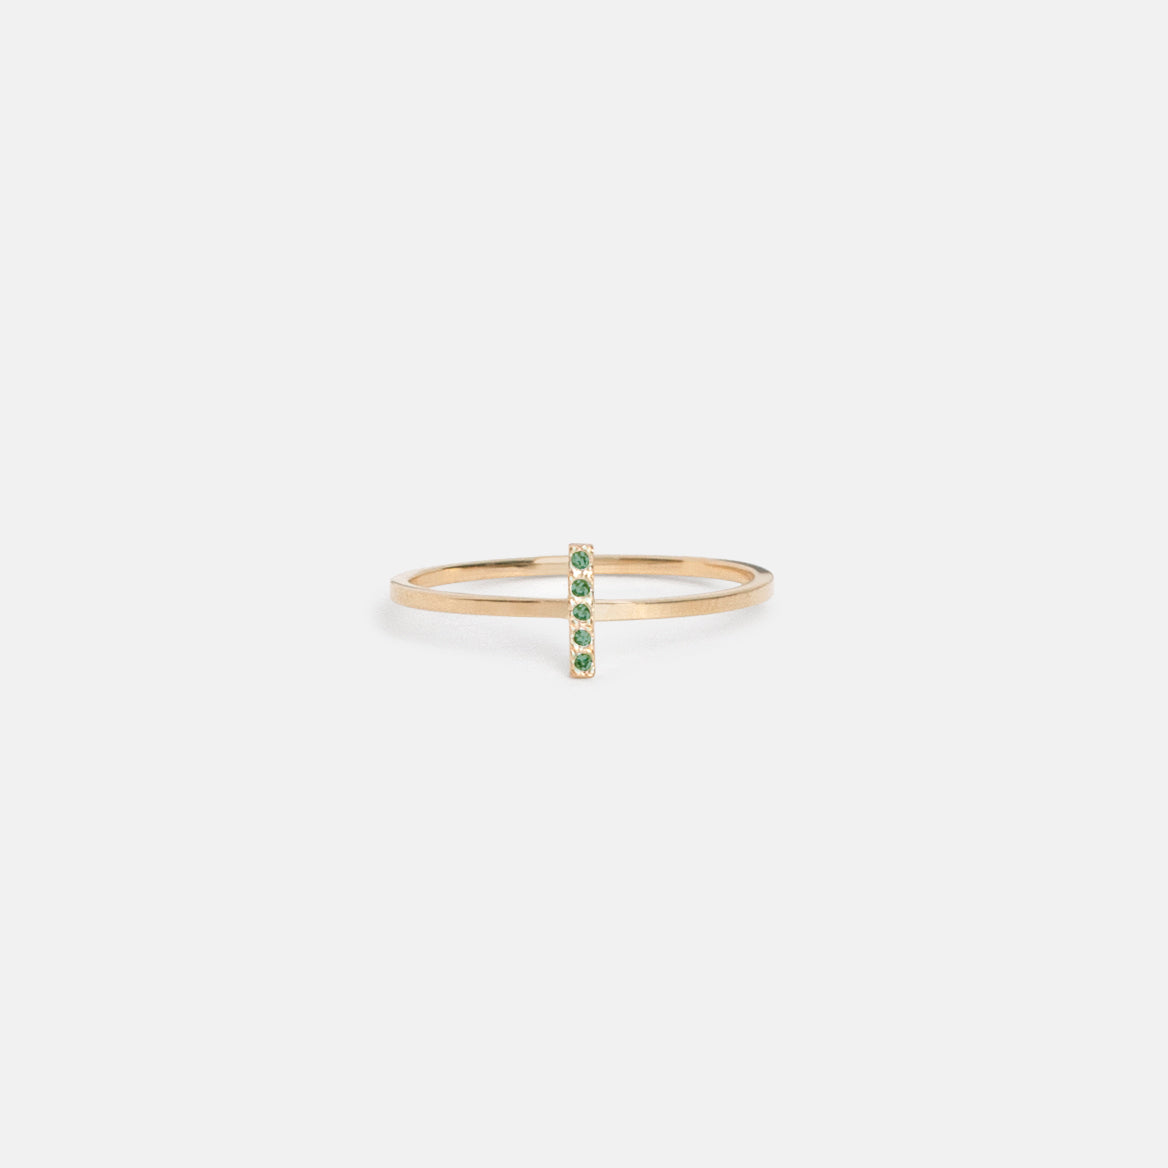 Stevi Thin Ring in 14k Gold set with Emeralds by SHW Fine Jewelry